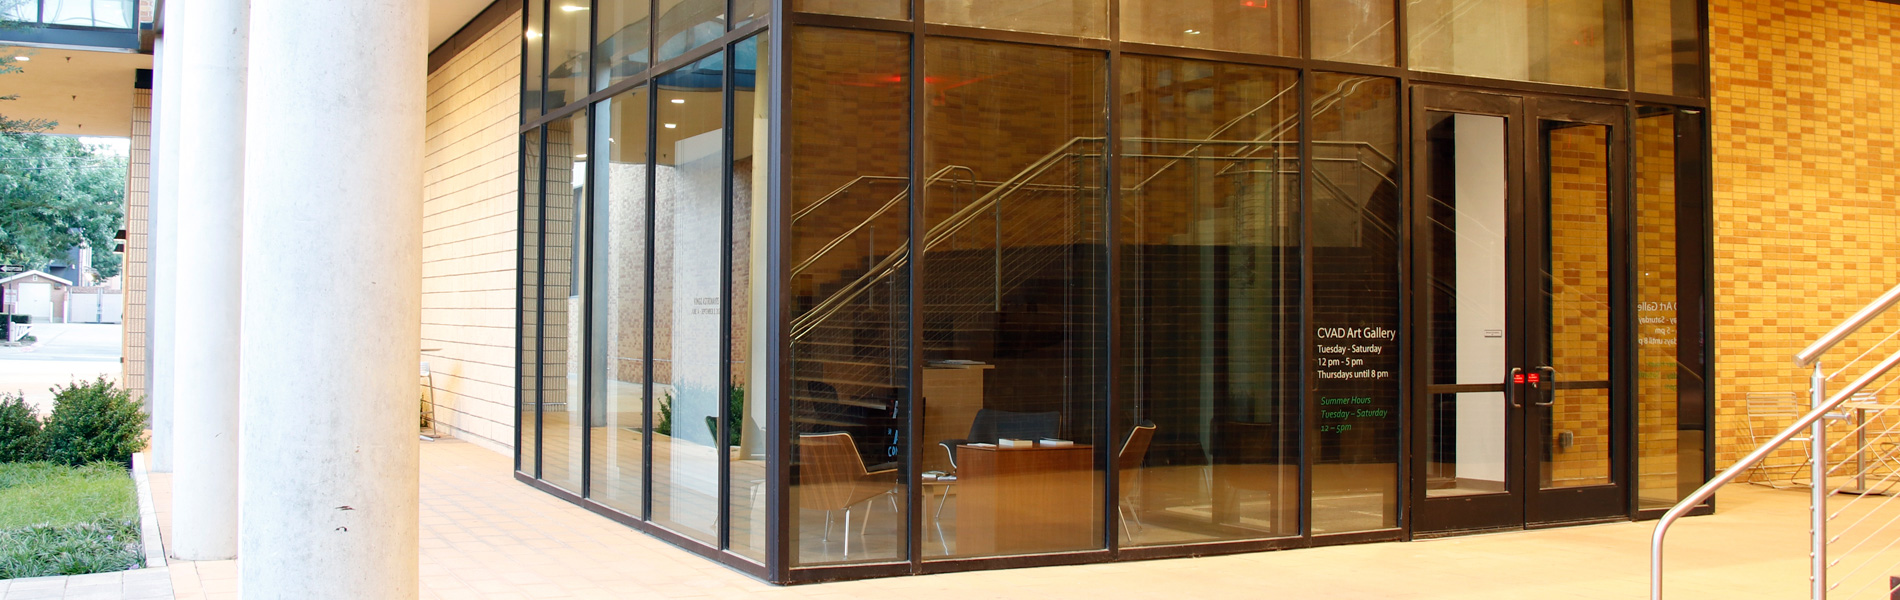 CVAD Gallery glass entry doors with the brick staircase in the reflection.